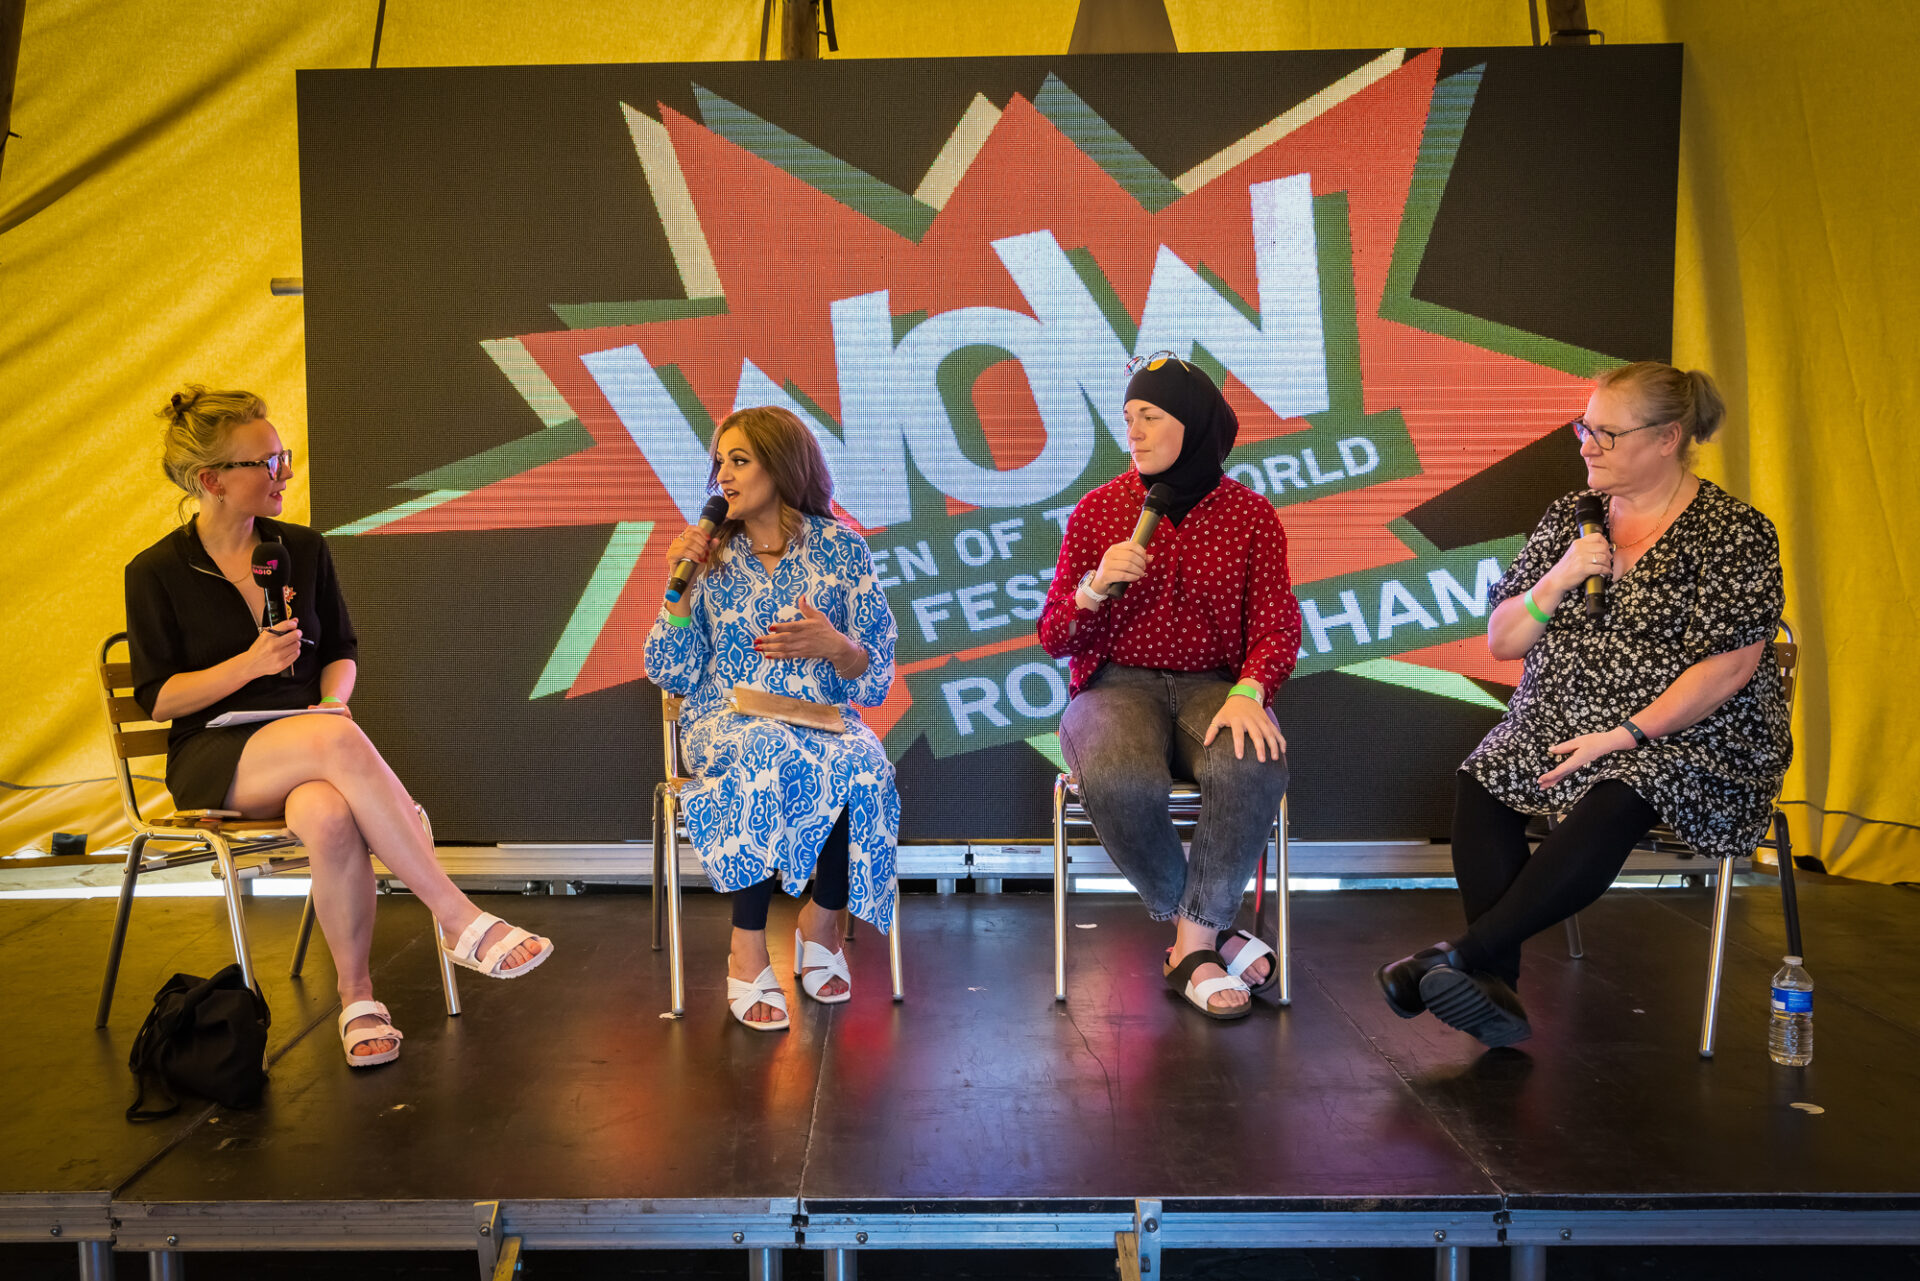 WOW Rotherham Festival Returns with a Day of Empowering Events and Activities